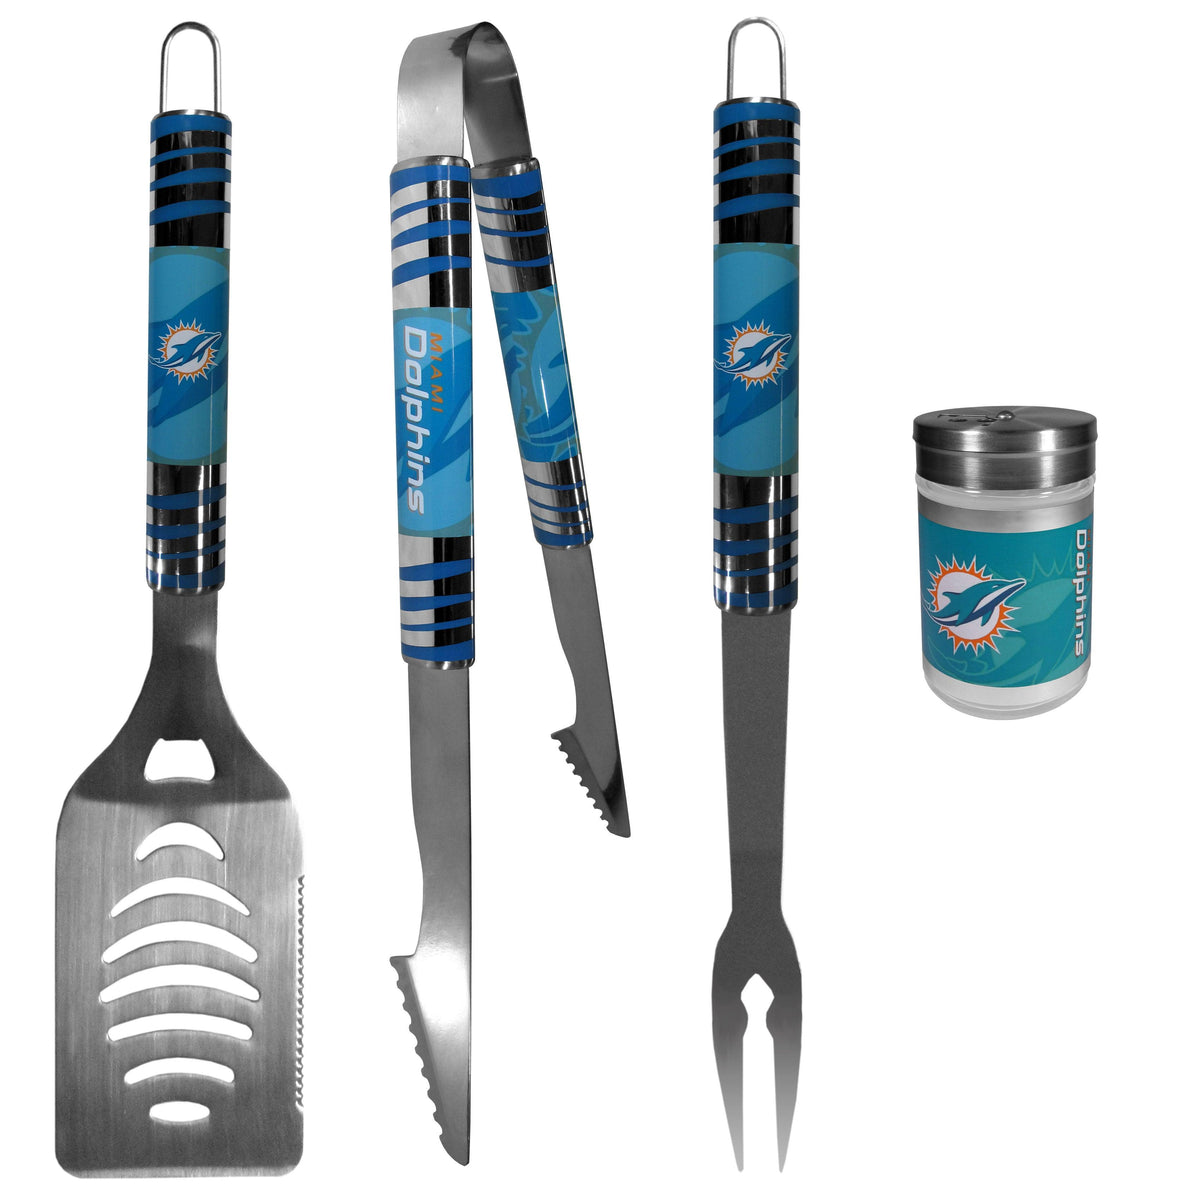 Miami Dolphins 3 pc Tailgater BBQ Set and Season Shaker - Flyclothing LLC